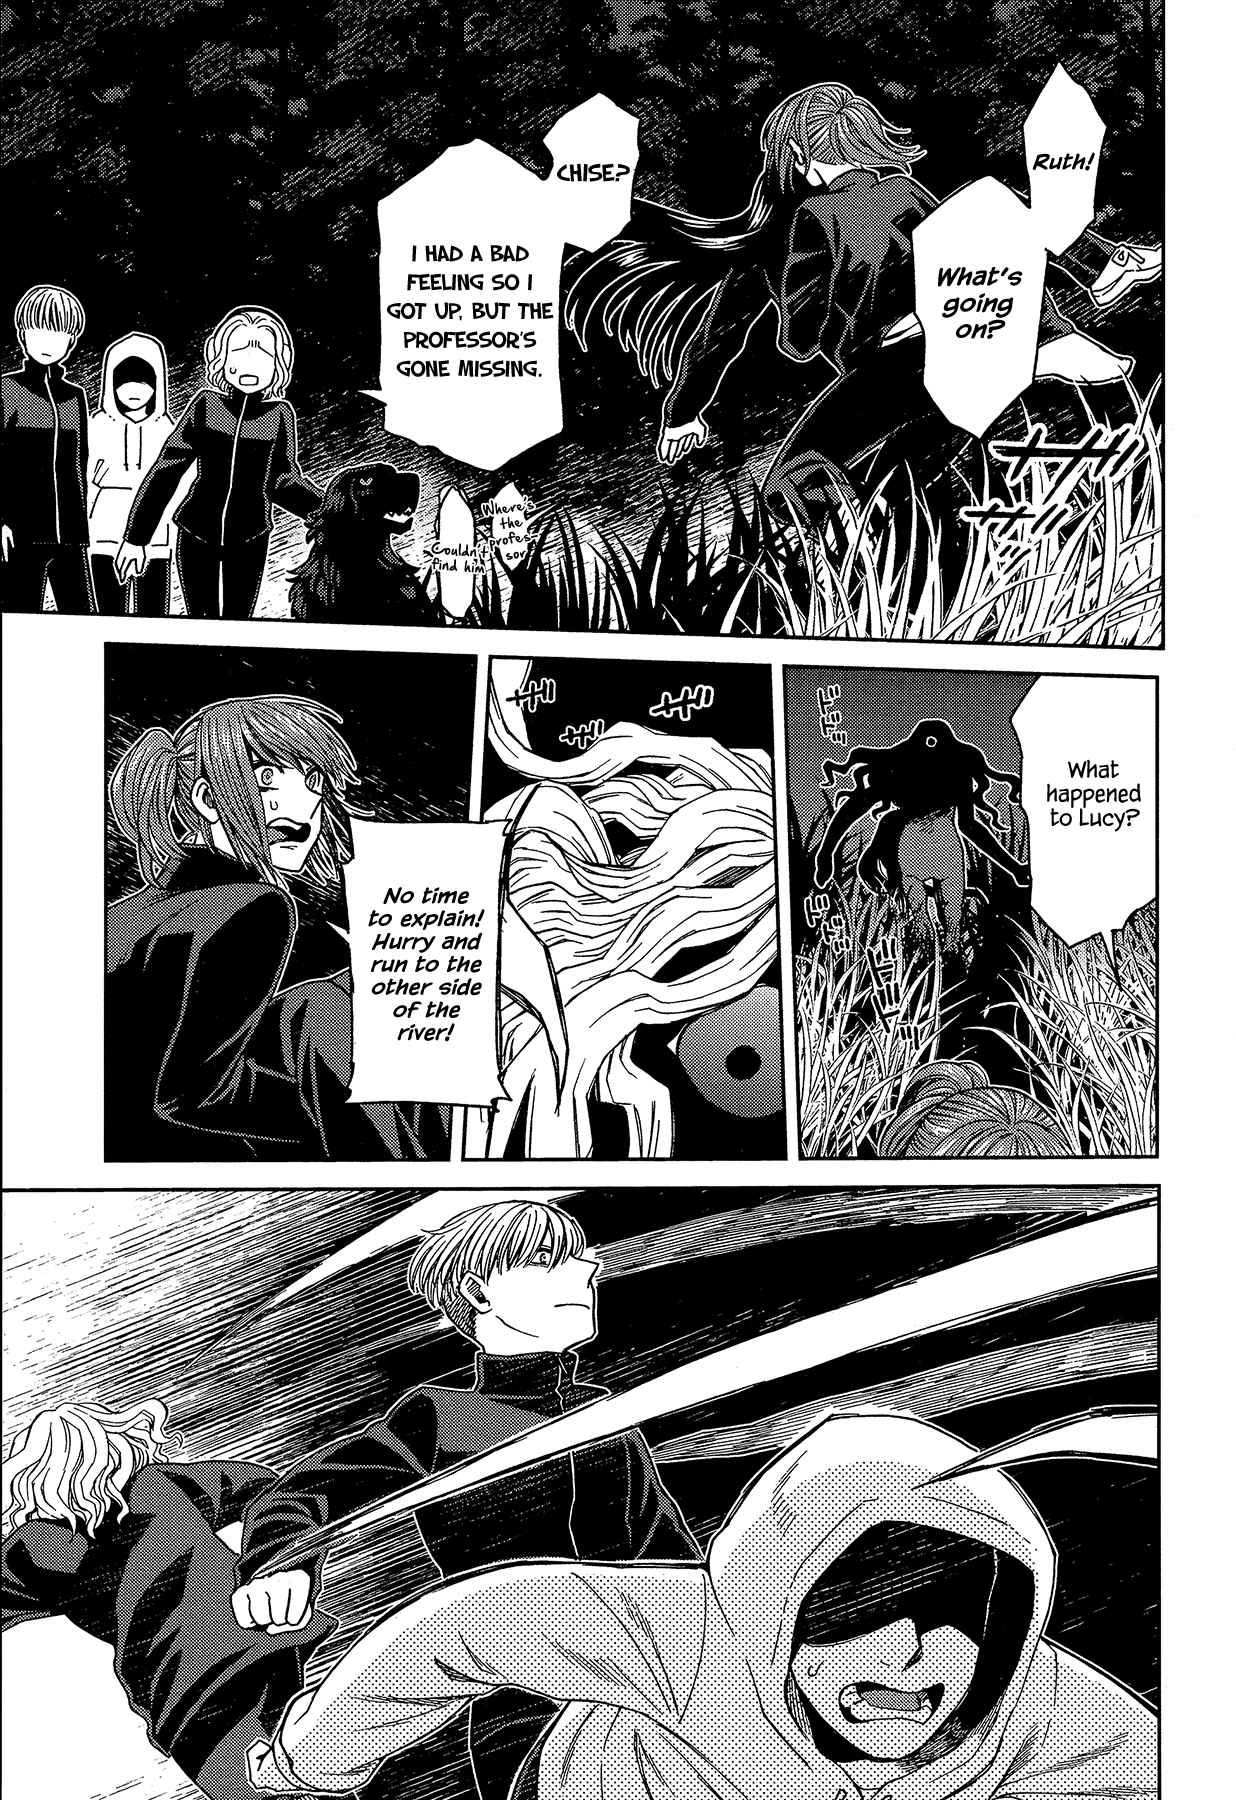 The Ancient Magus' Bride Vol. 12 Ch. 61 Slow and Sure III